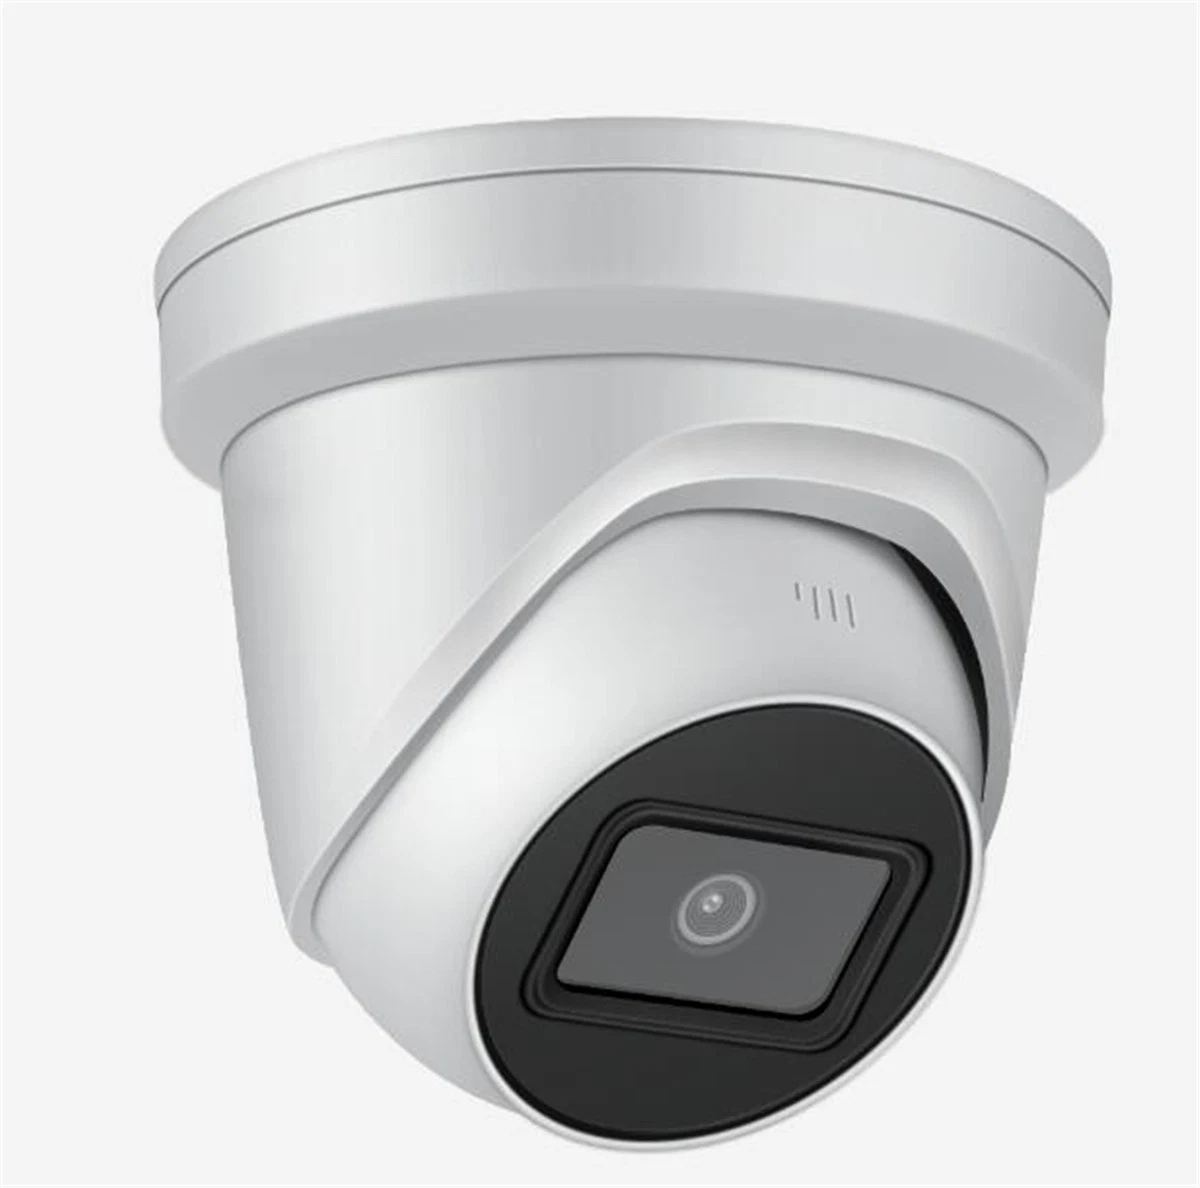 Hot Selling Bullet Dome 360 Degree IP Security CCTV Camera